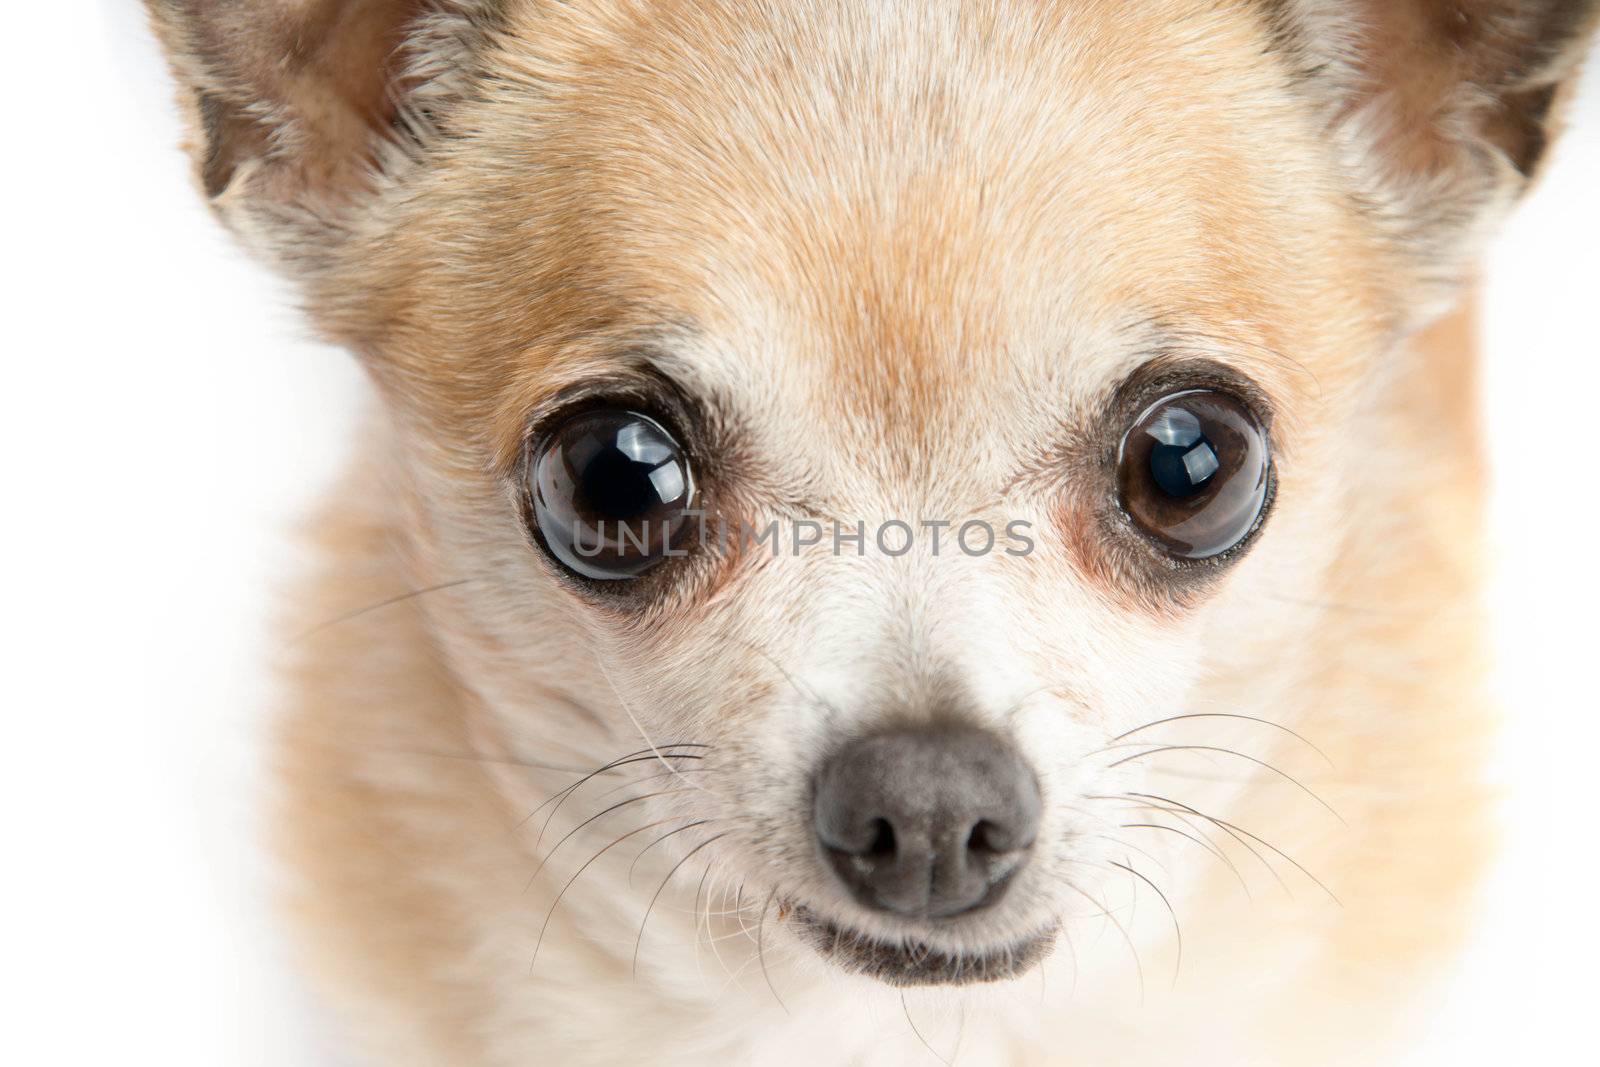 Cute tan chihuahua dog.  Close up isolated on white background.